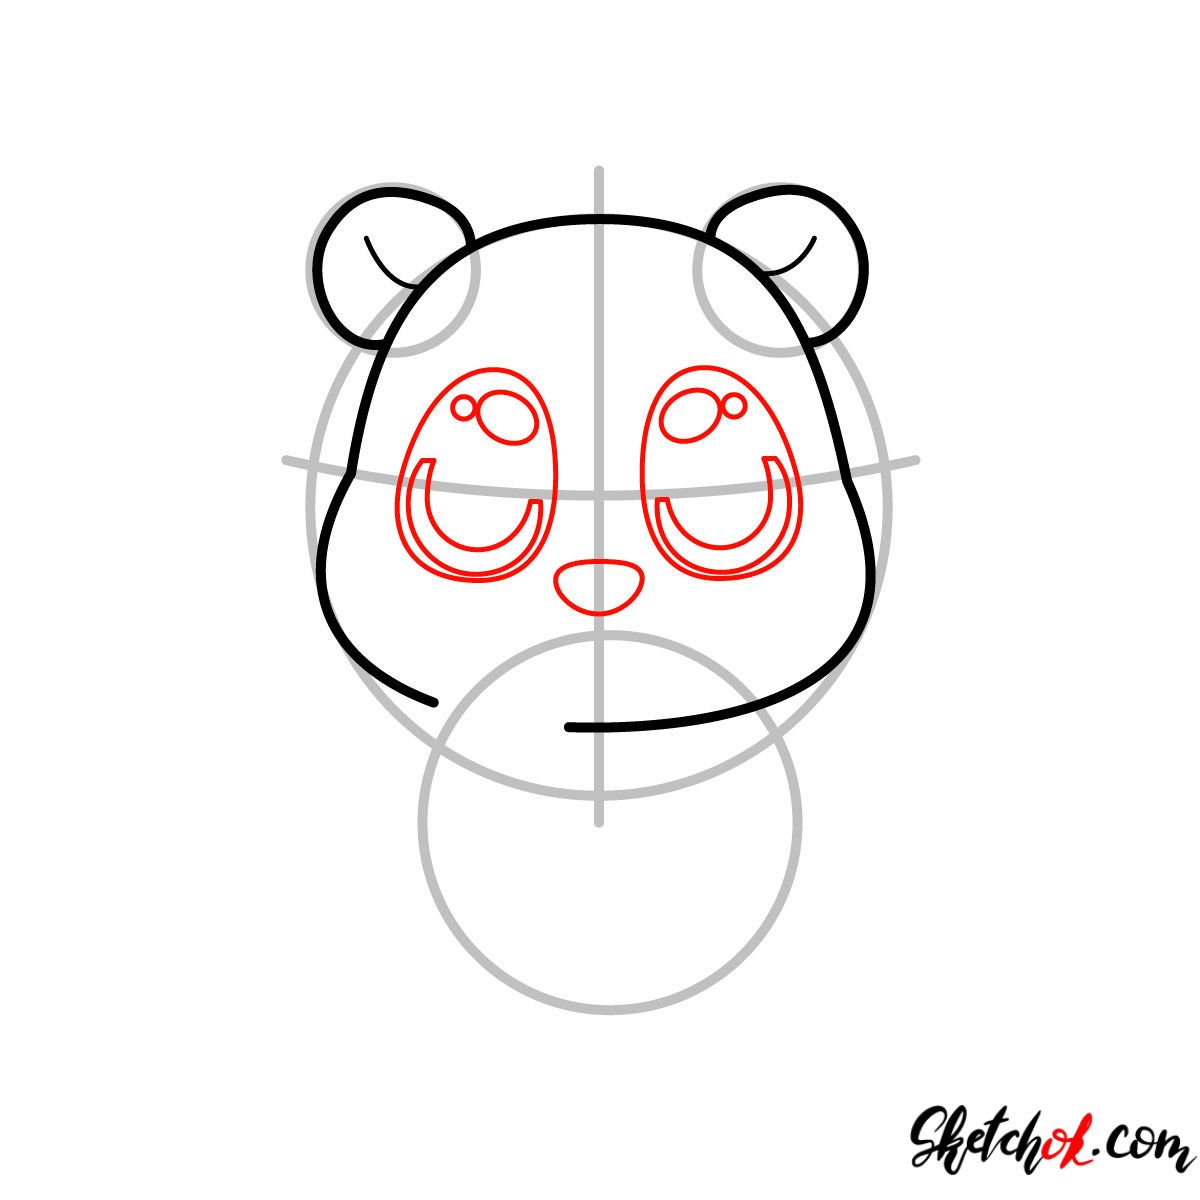 How to draw Pooh Bear chibi - step 04